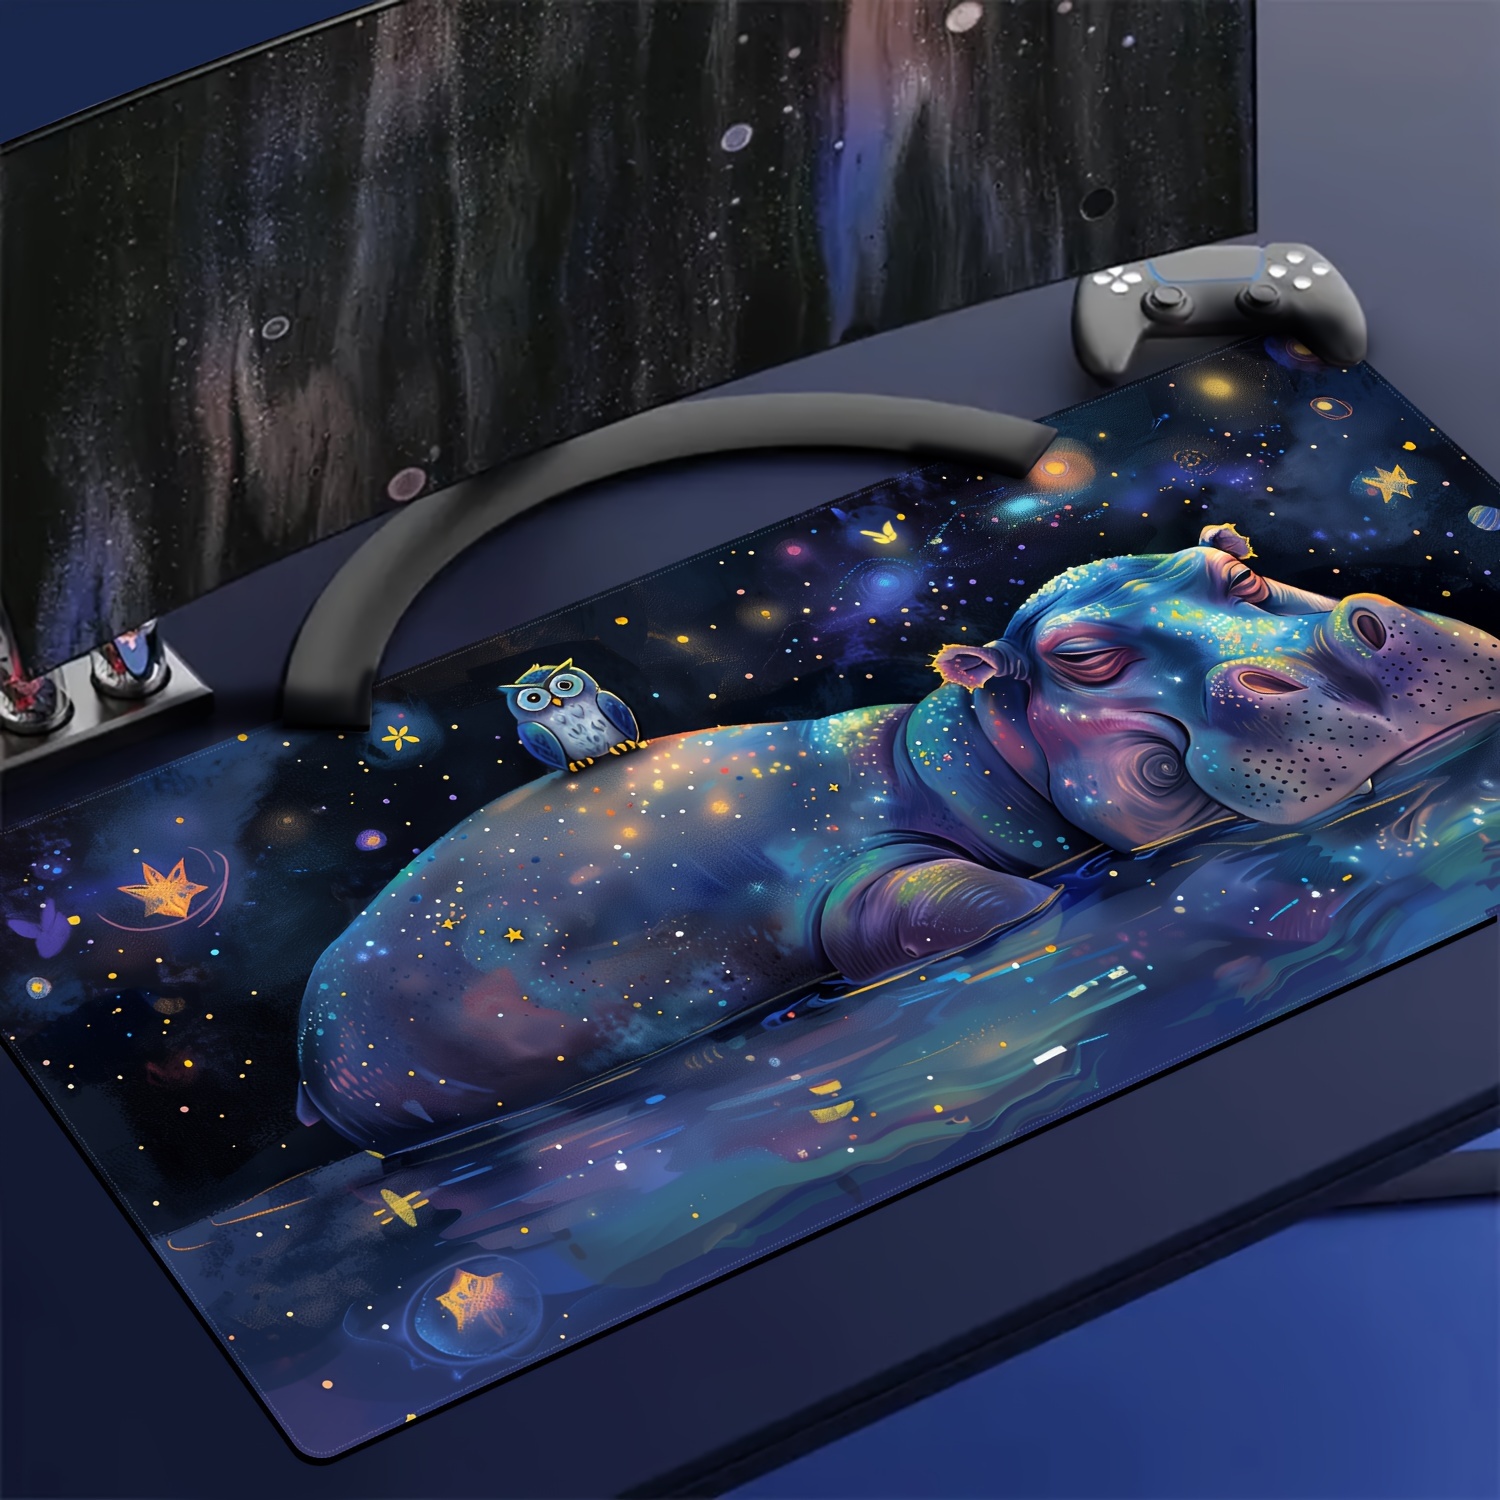 

Starry Hippo & Owl Galaxy Desk Mat - Large Rubber Mouse Pad With Non-slip Base, Washable Keyboard Pad For Home & Office Desk Accessories